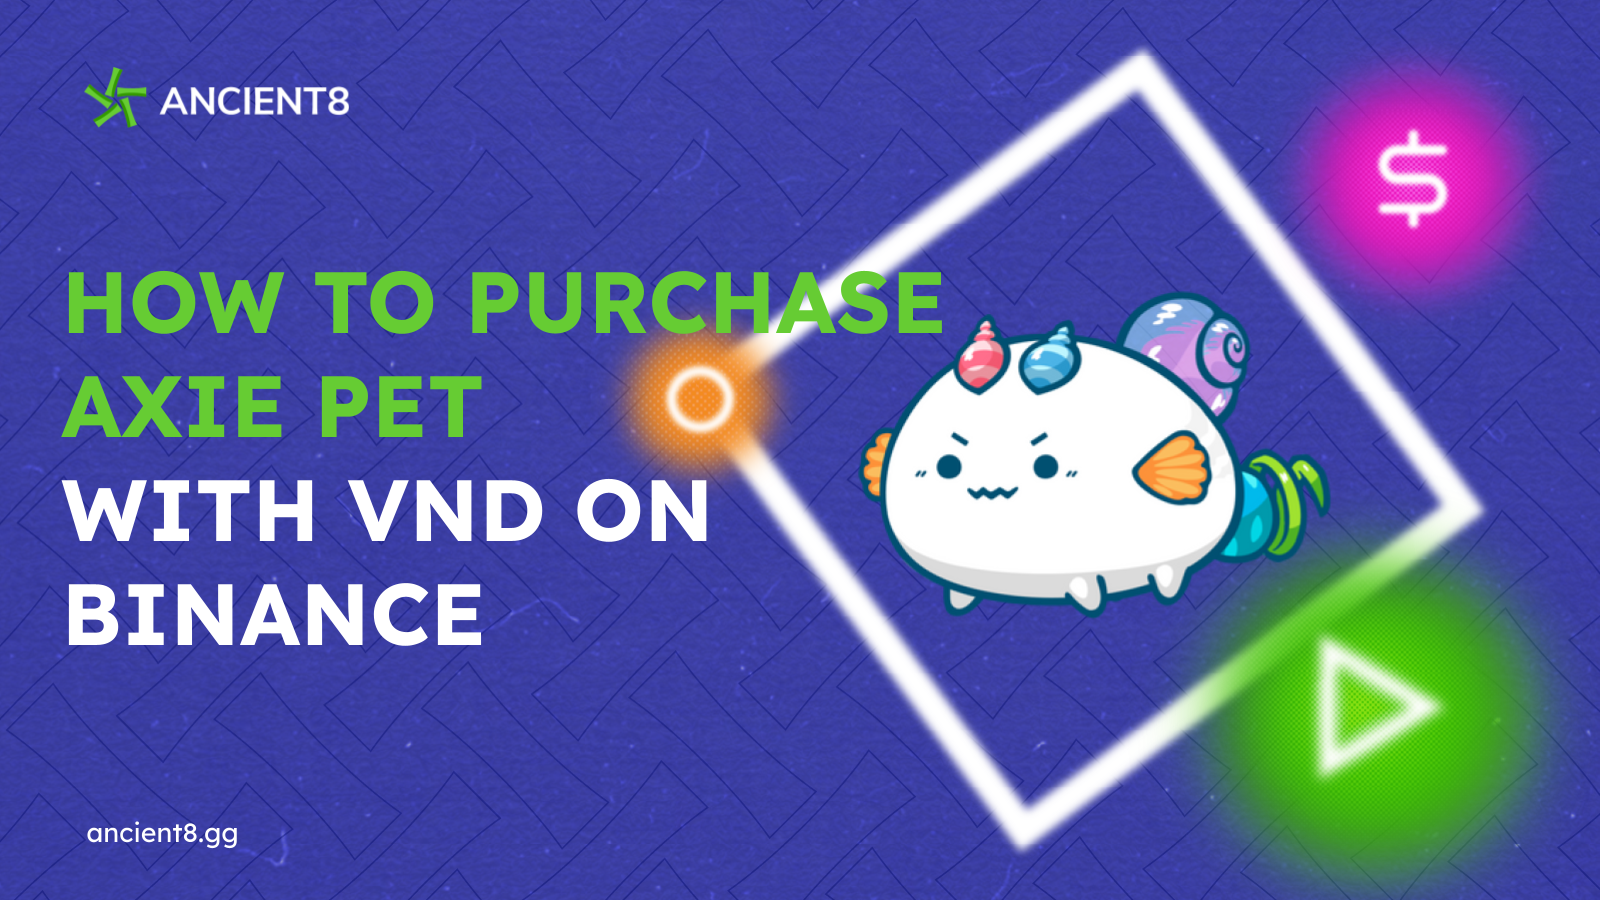 How to purchase Axie Pet with VND on Binance